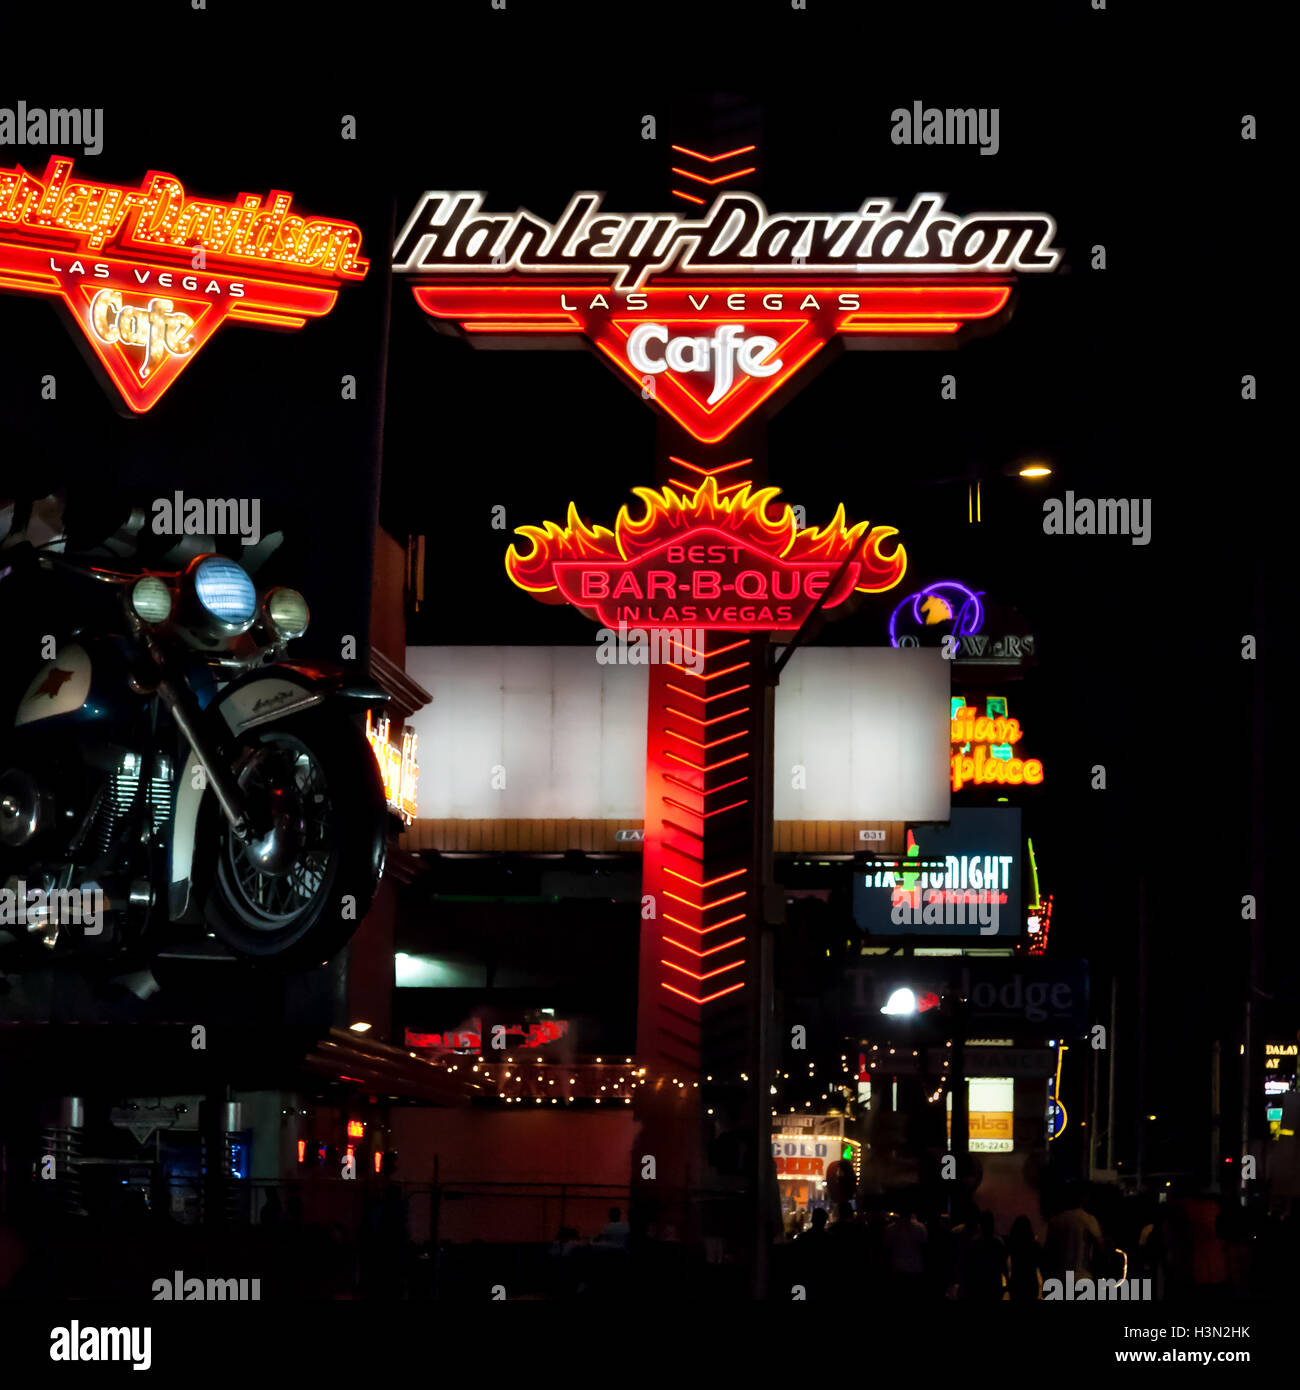 Harley Davidson Cafe at nNght in Las Vegas Stock Photo